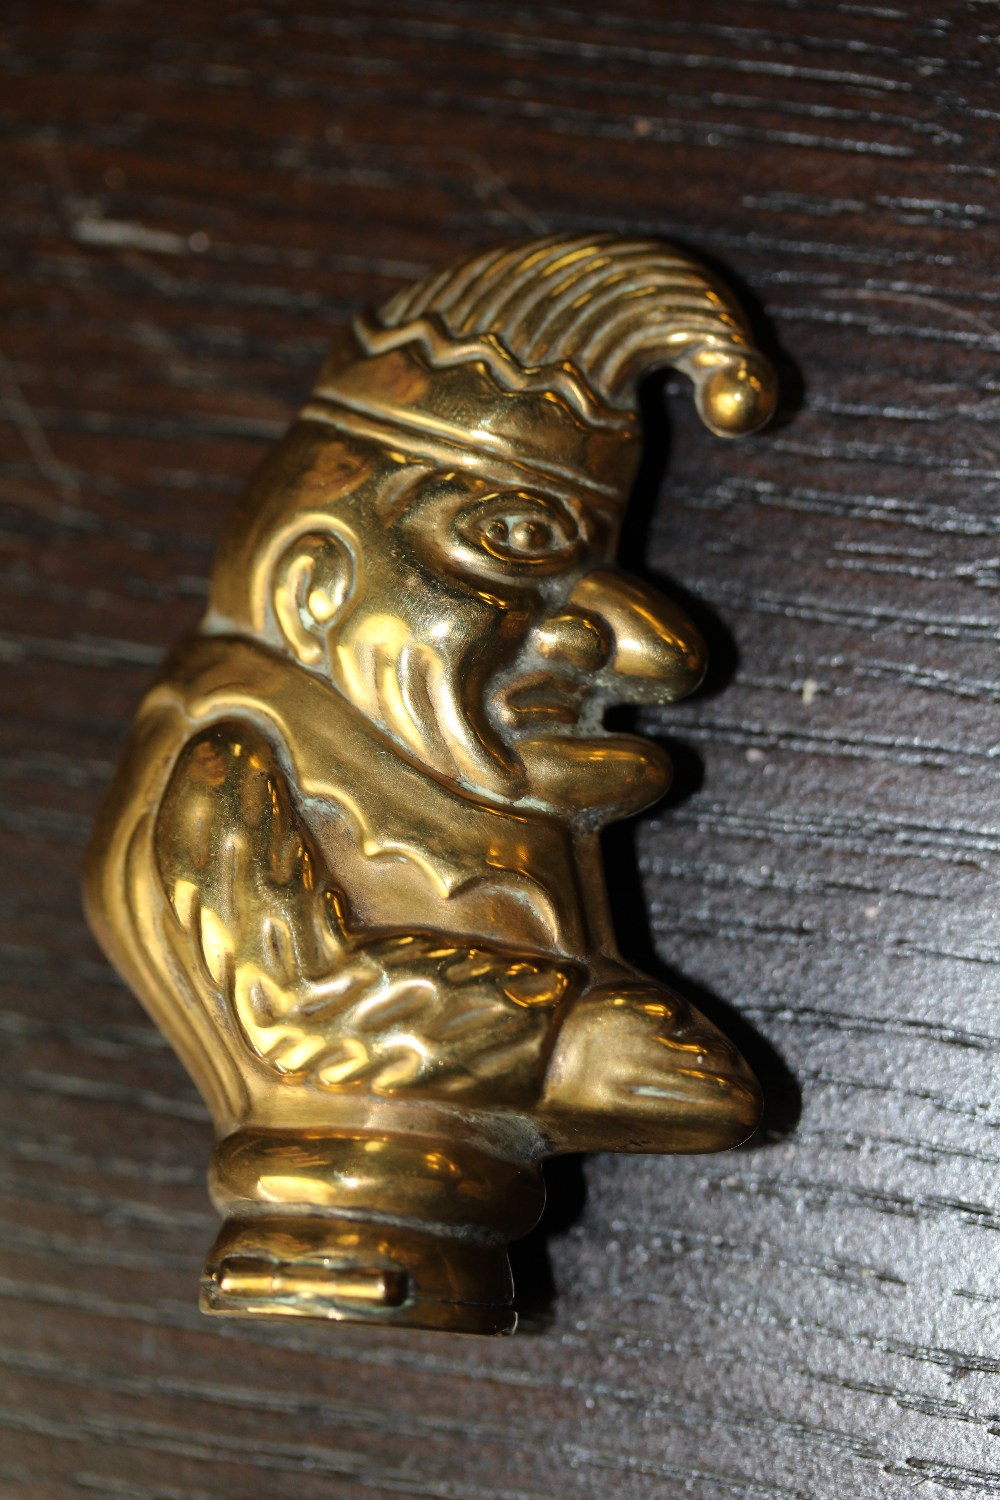 Early 20th Century embossed brass Mr Punch vesta case - Image 2 of 2